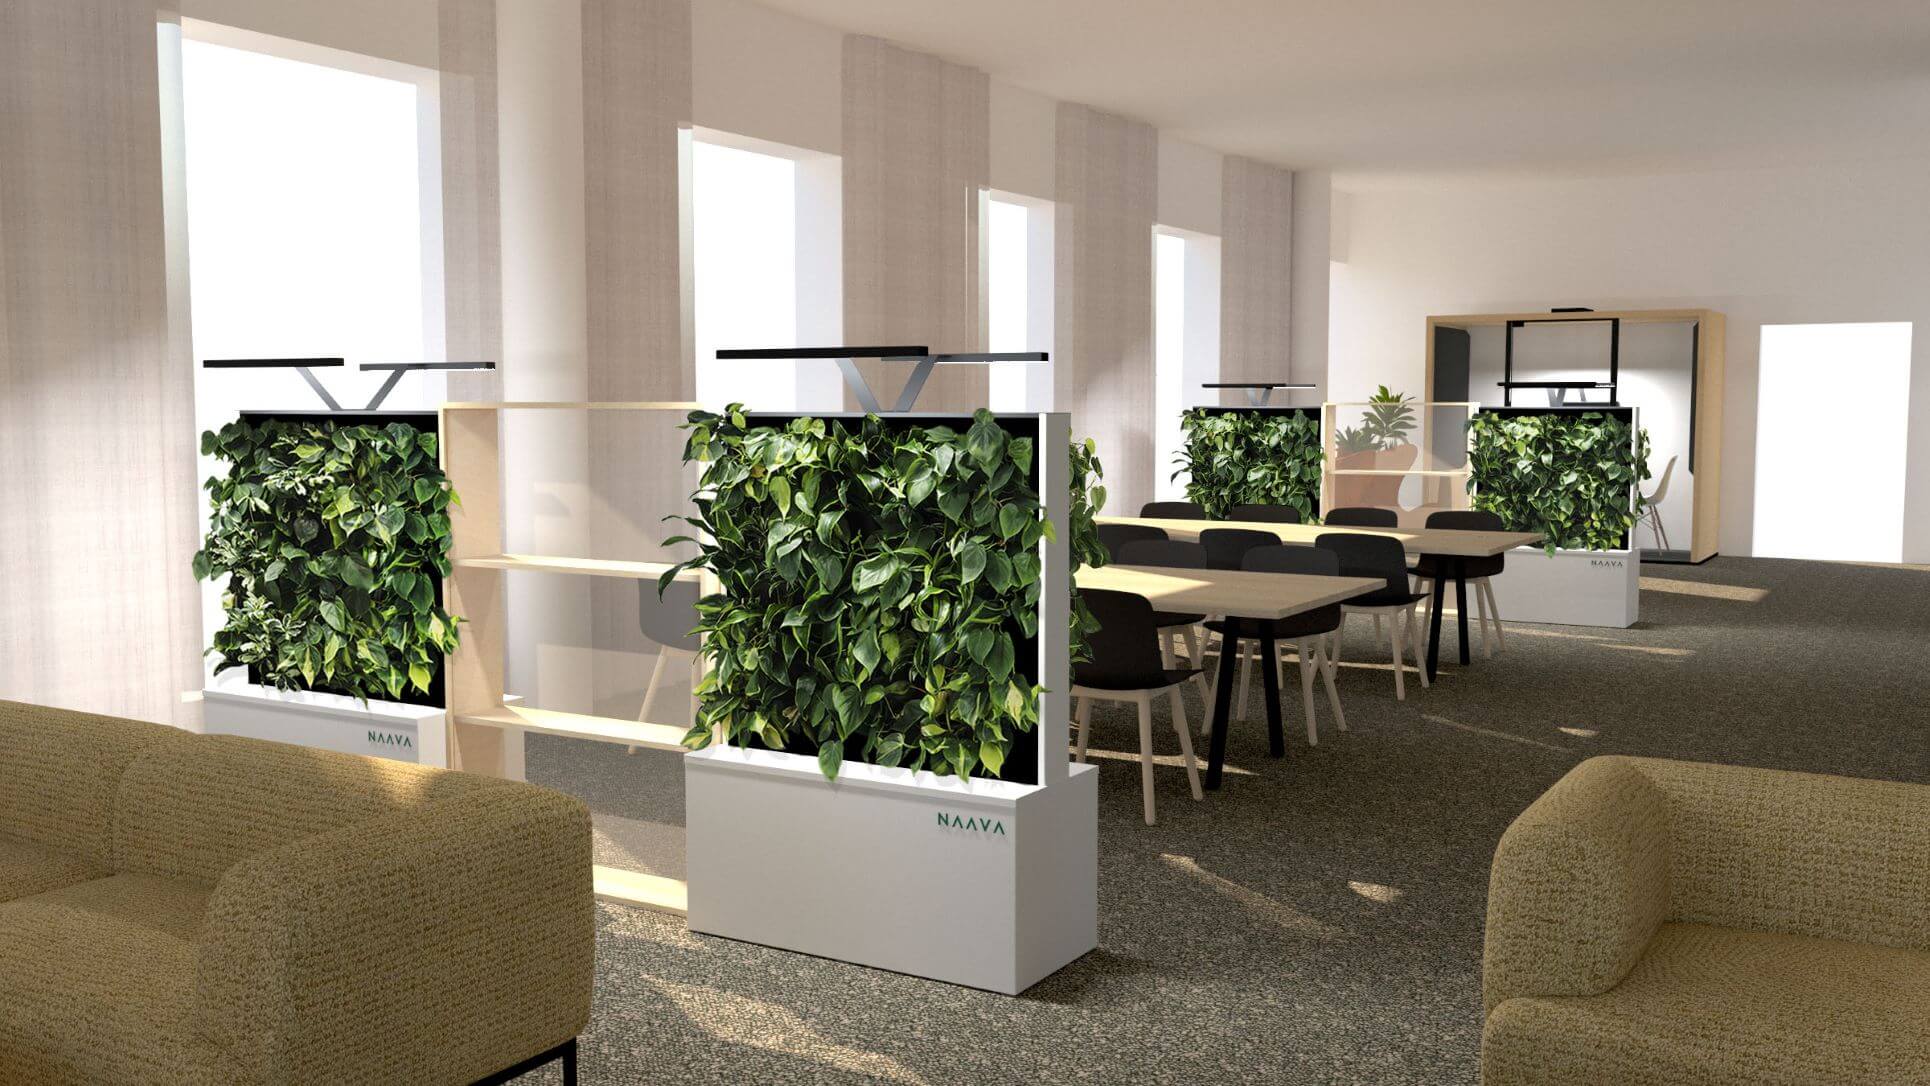 Naava-office filled with smart green walls 